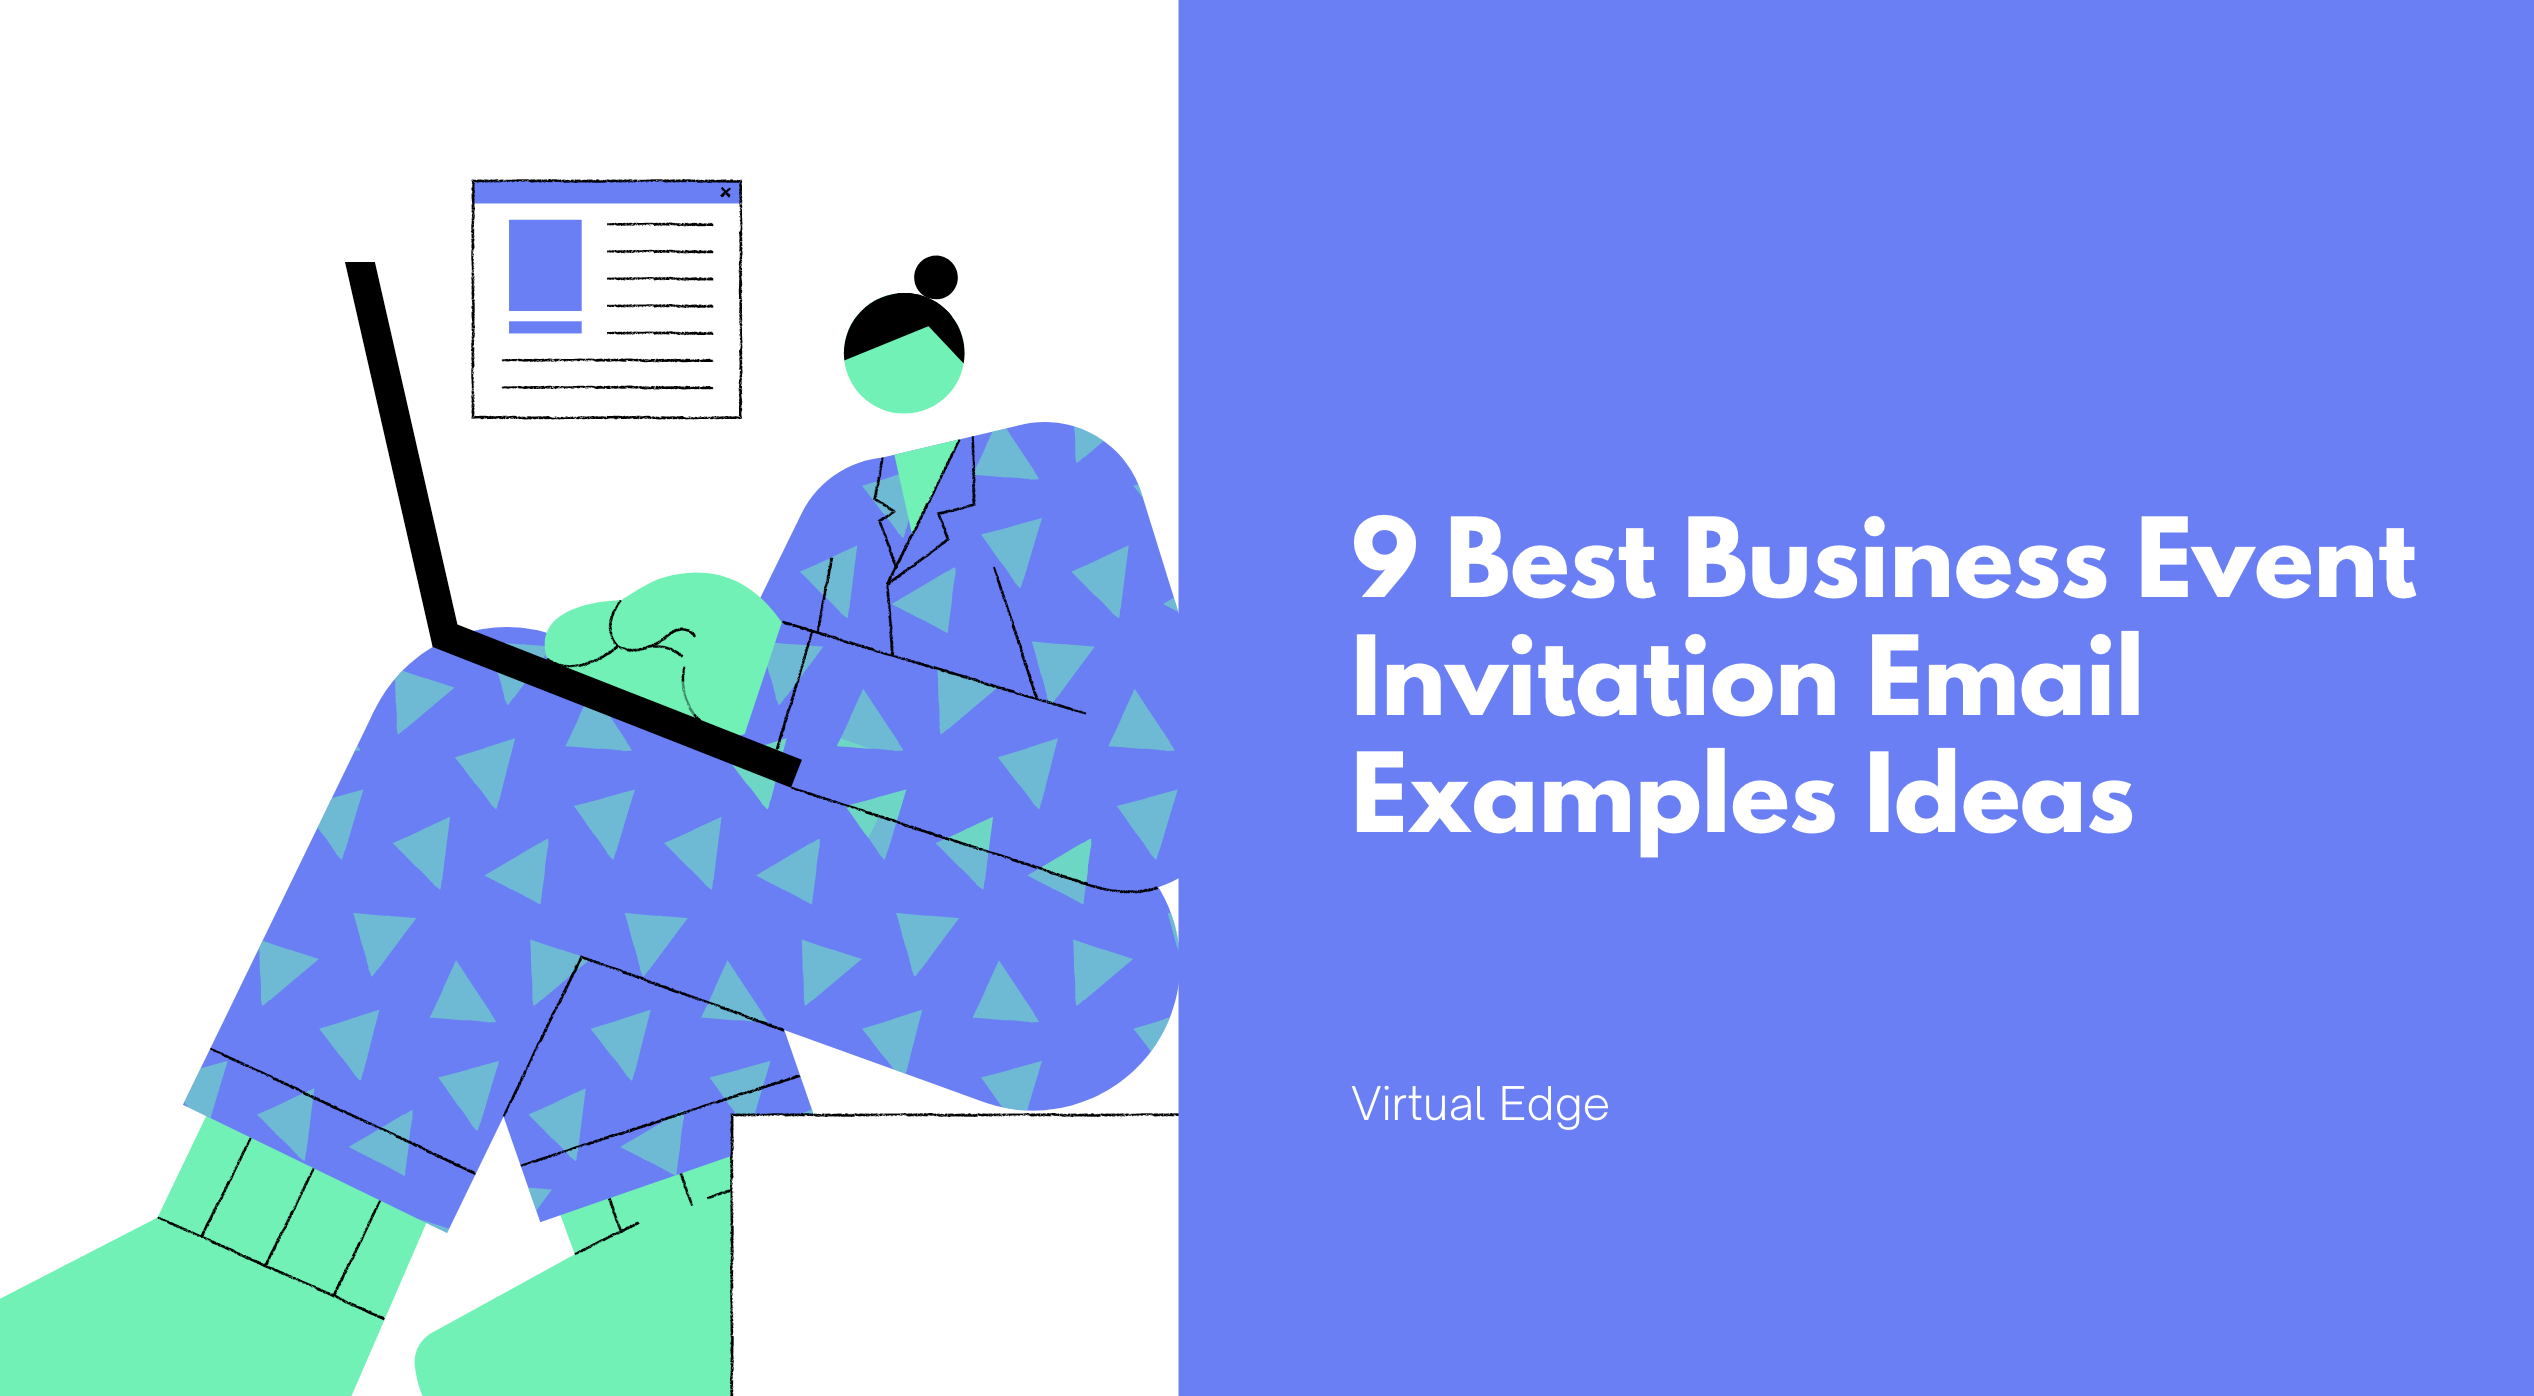 18 Best Business Event Invitation Email Examples Ideas  Virtual Edge